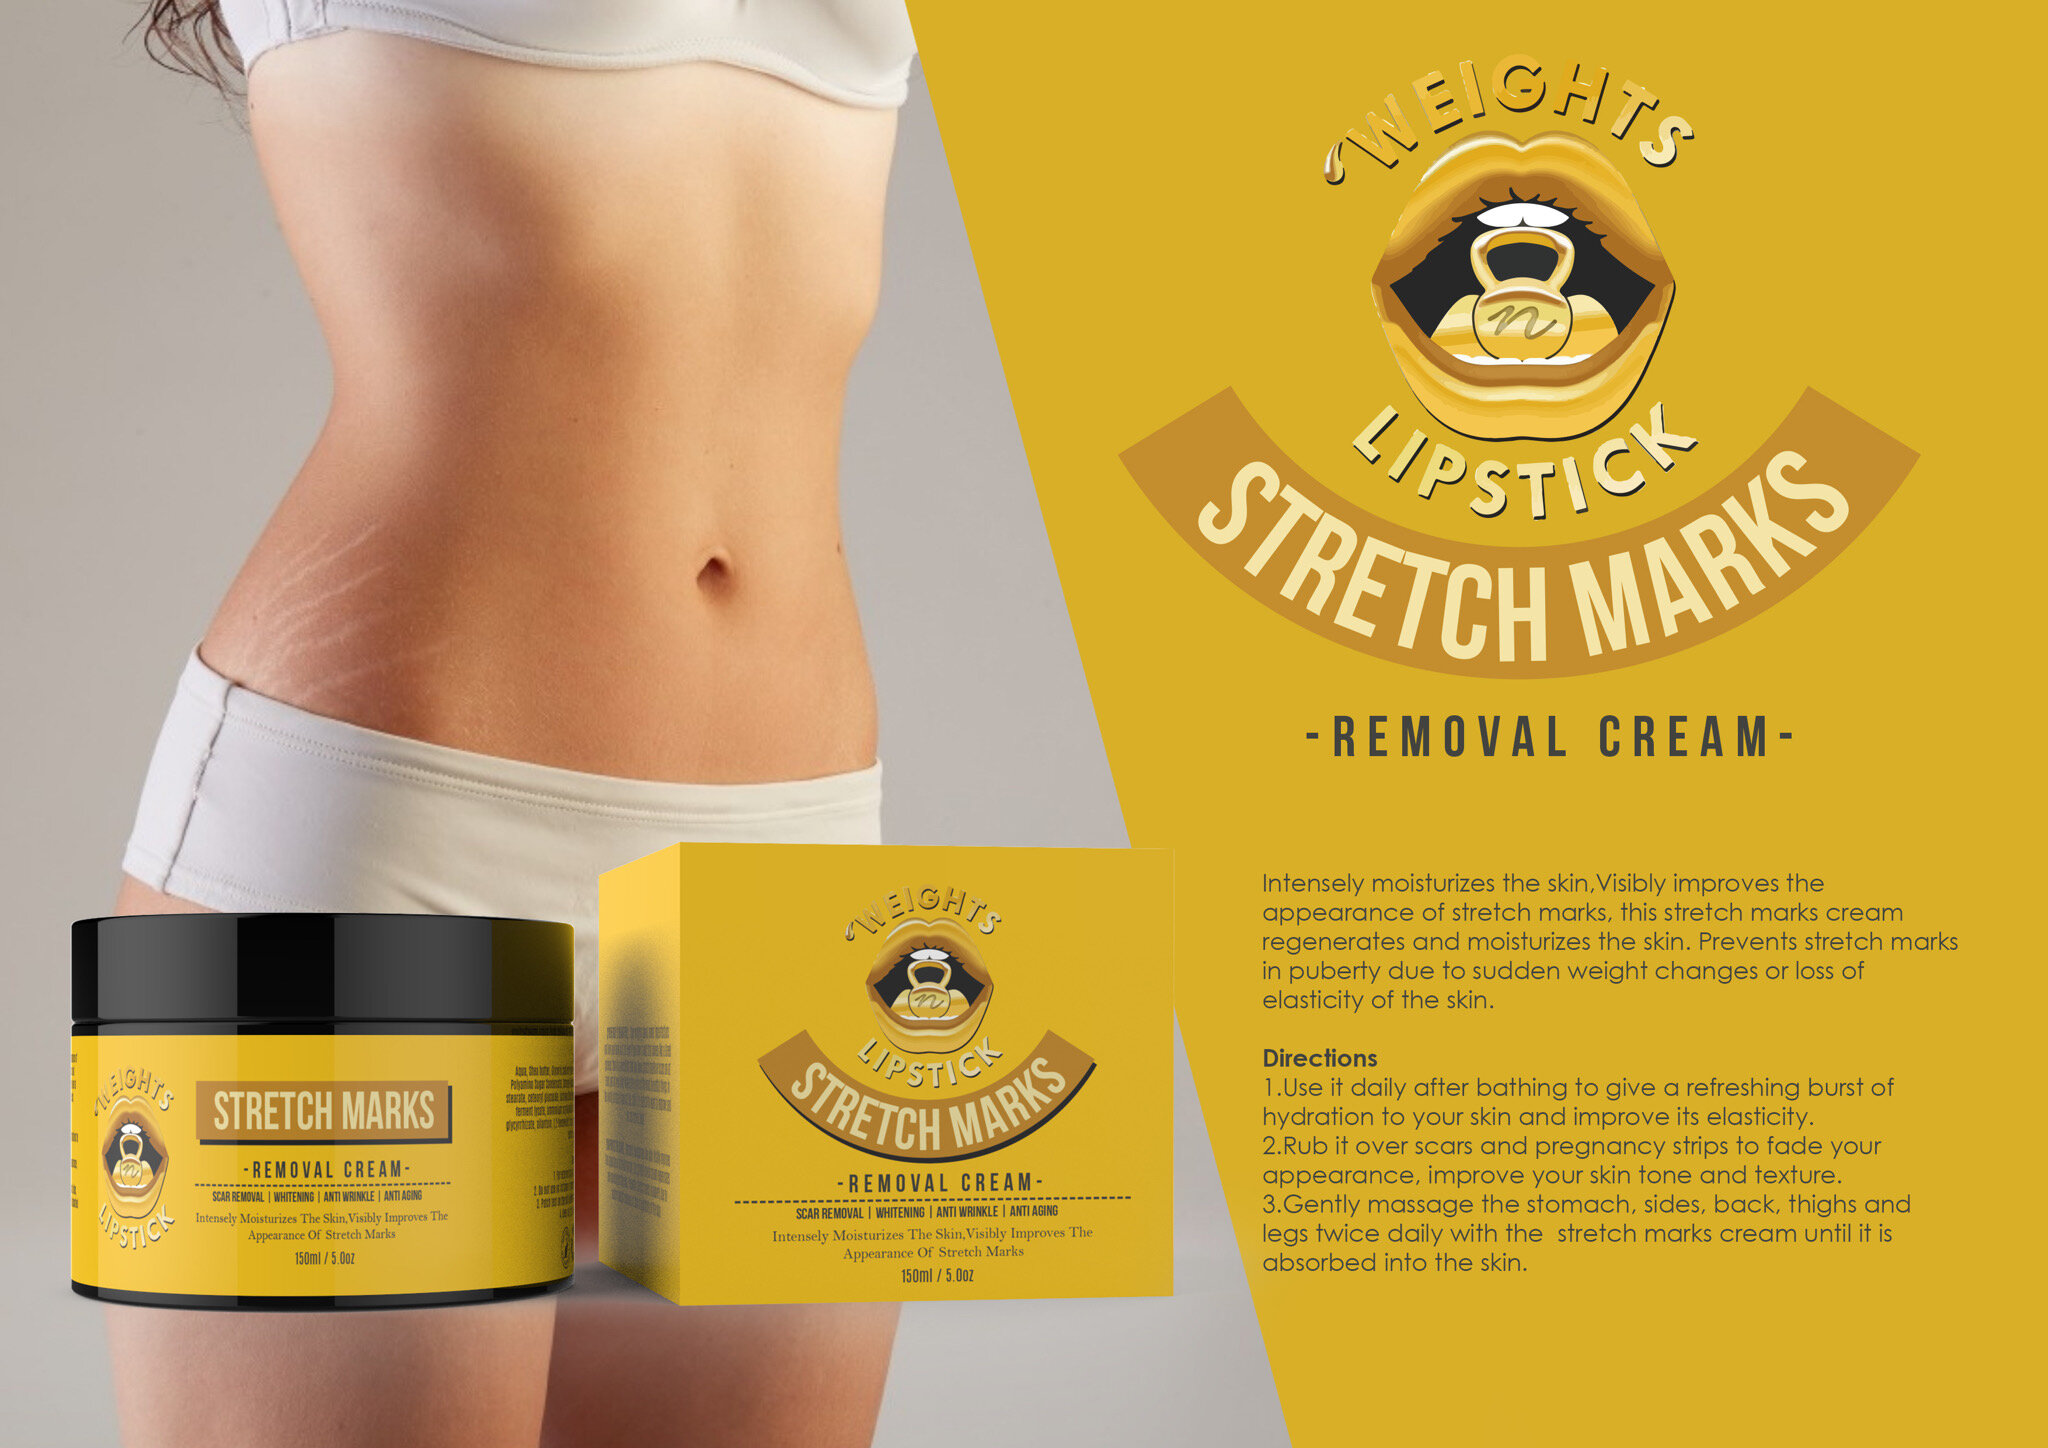 How to Get Rid of Stretch Marks in 2021 According to Pros